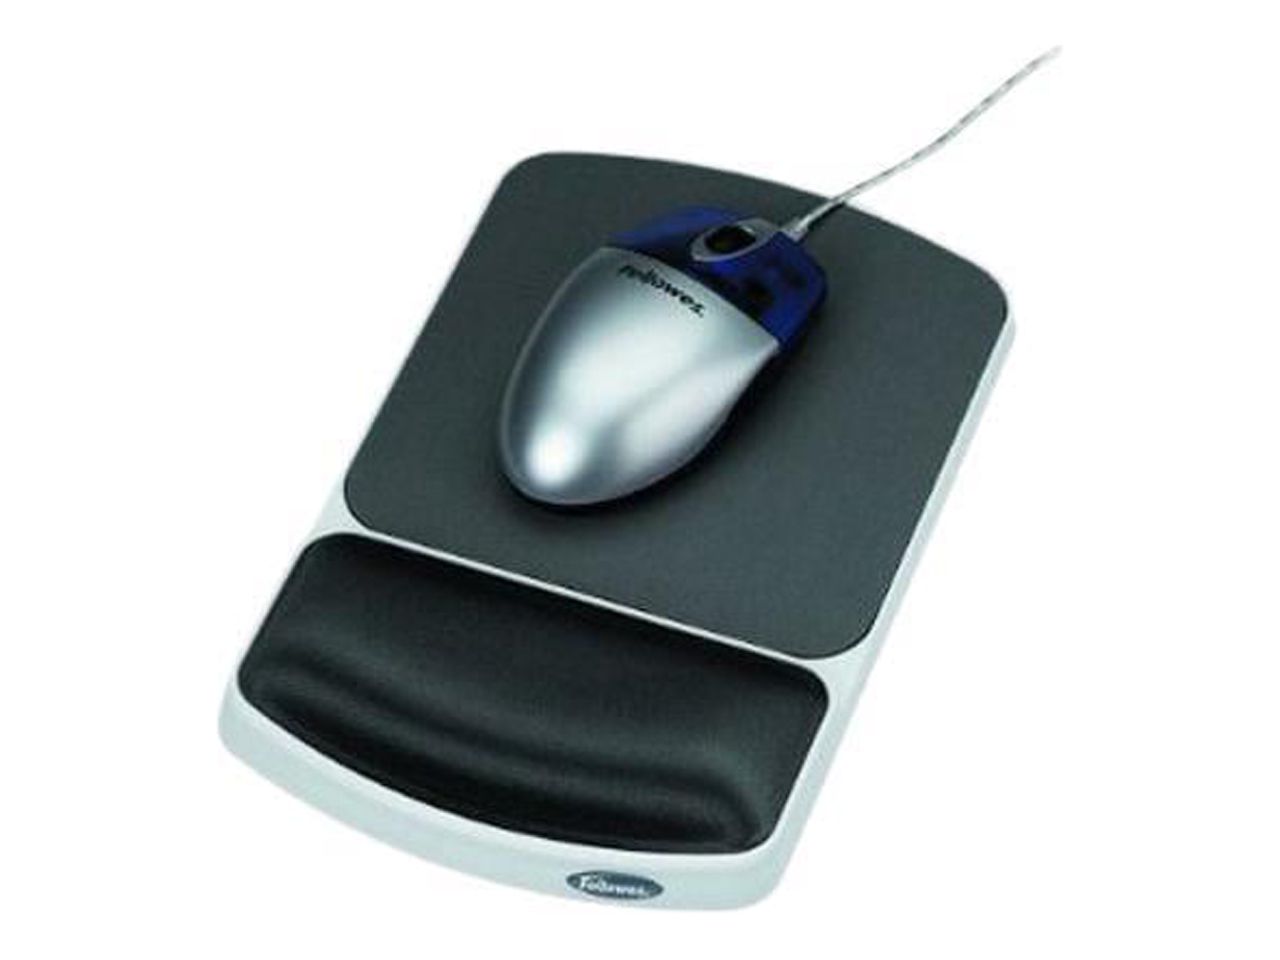 Fellowes 91741 Gel Wrist Rest and Mouse Pad - Graphite/Platinum - image 1 of 3